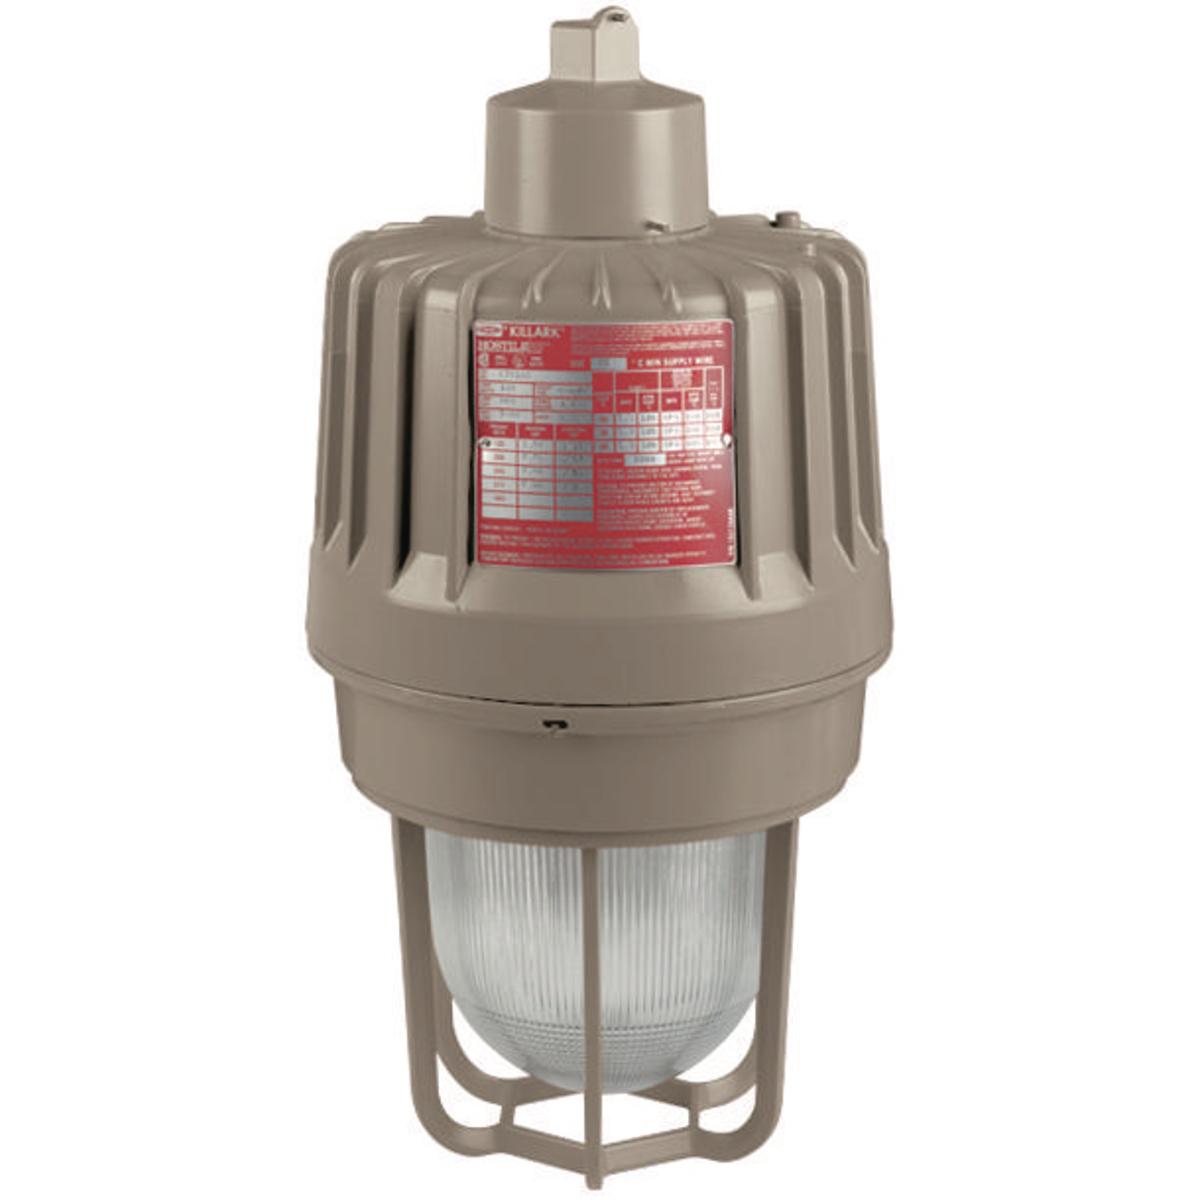 Hubbell EZS100A2 HID 100W Quadri-Volt High Pressure Sodium 3/4" Pendant  ; Three light sources – High Pressure Sodium (50-400W), Metal Halide (70-400W) and Pulse Start Metal Halide (175-400W) ; Mounting choice –Pendant, ceiling, 25˚ stanchion or 90˚ wall mount, all with “